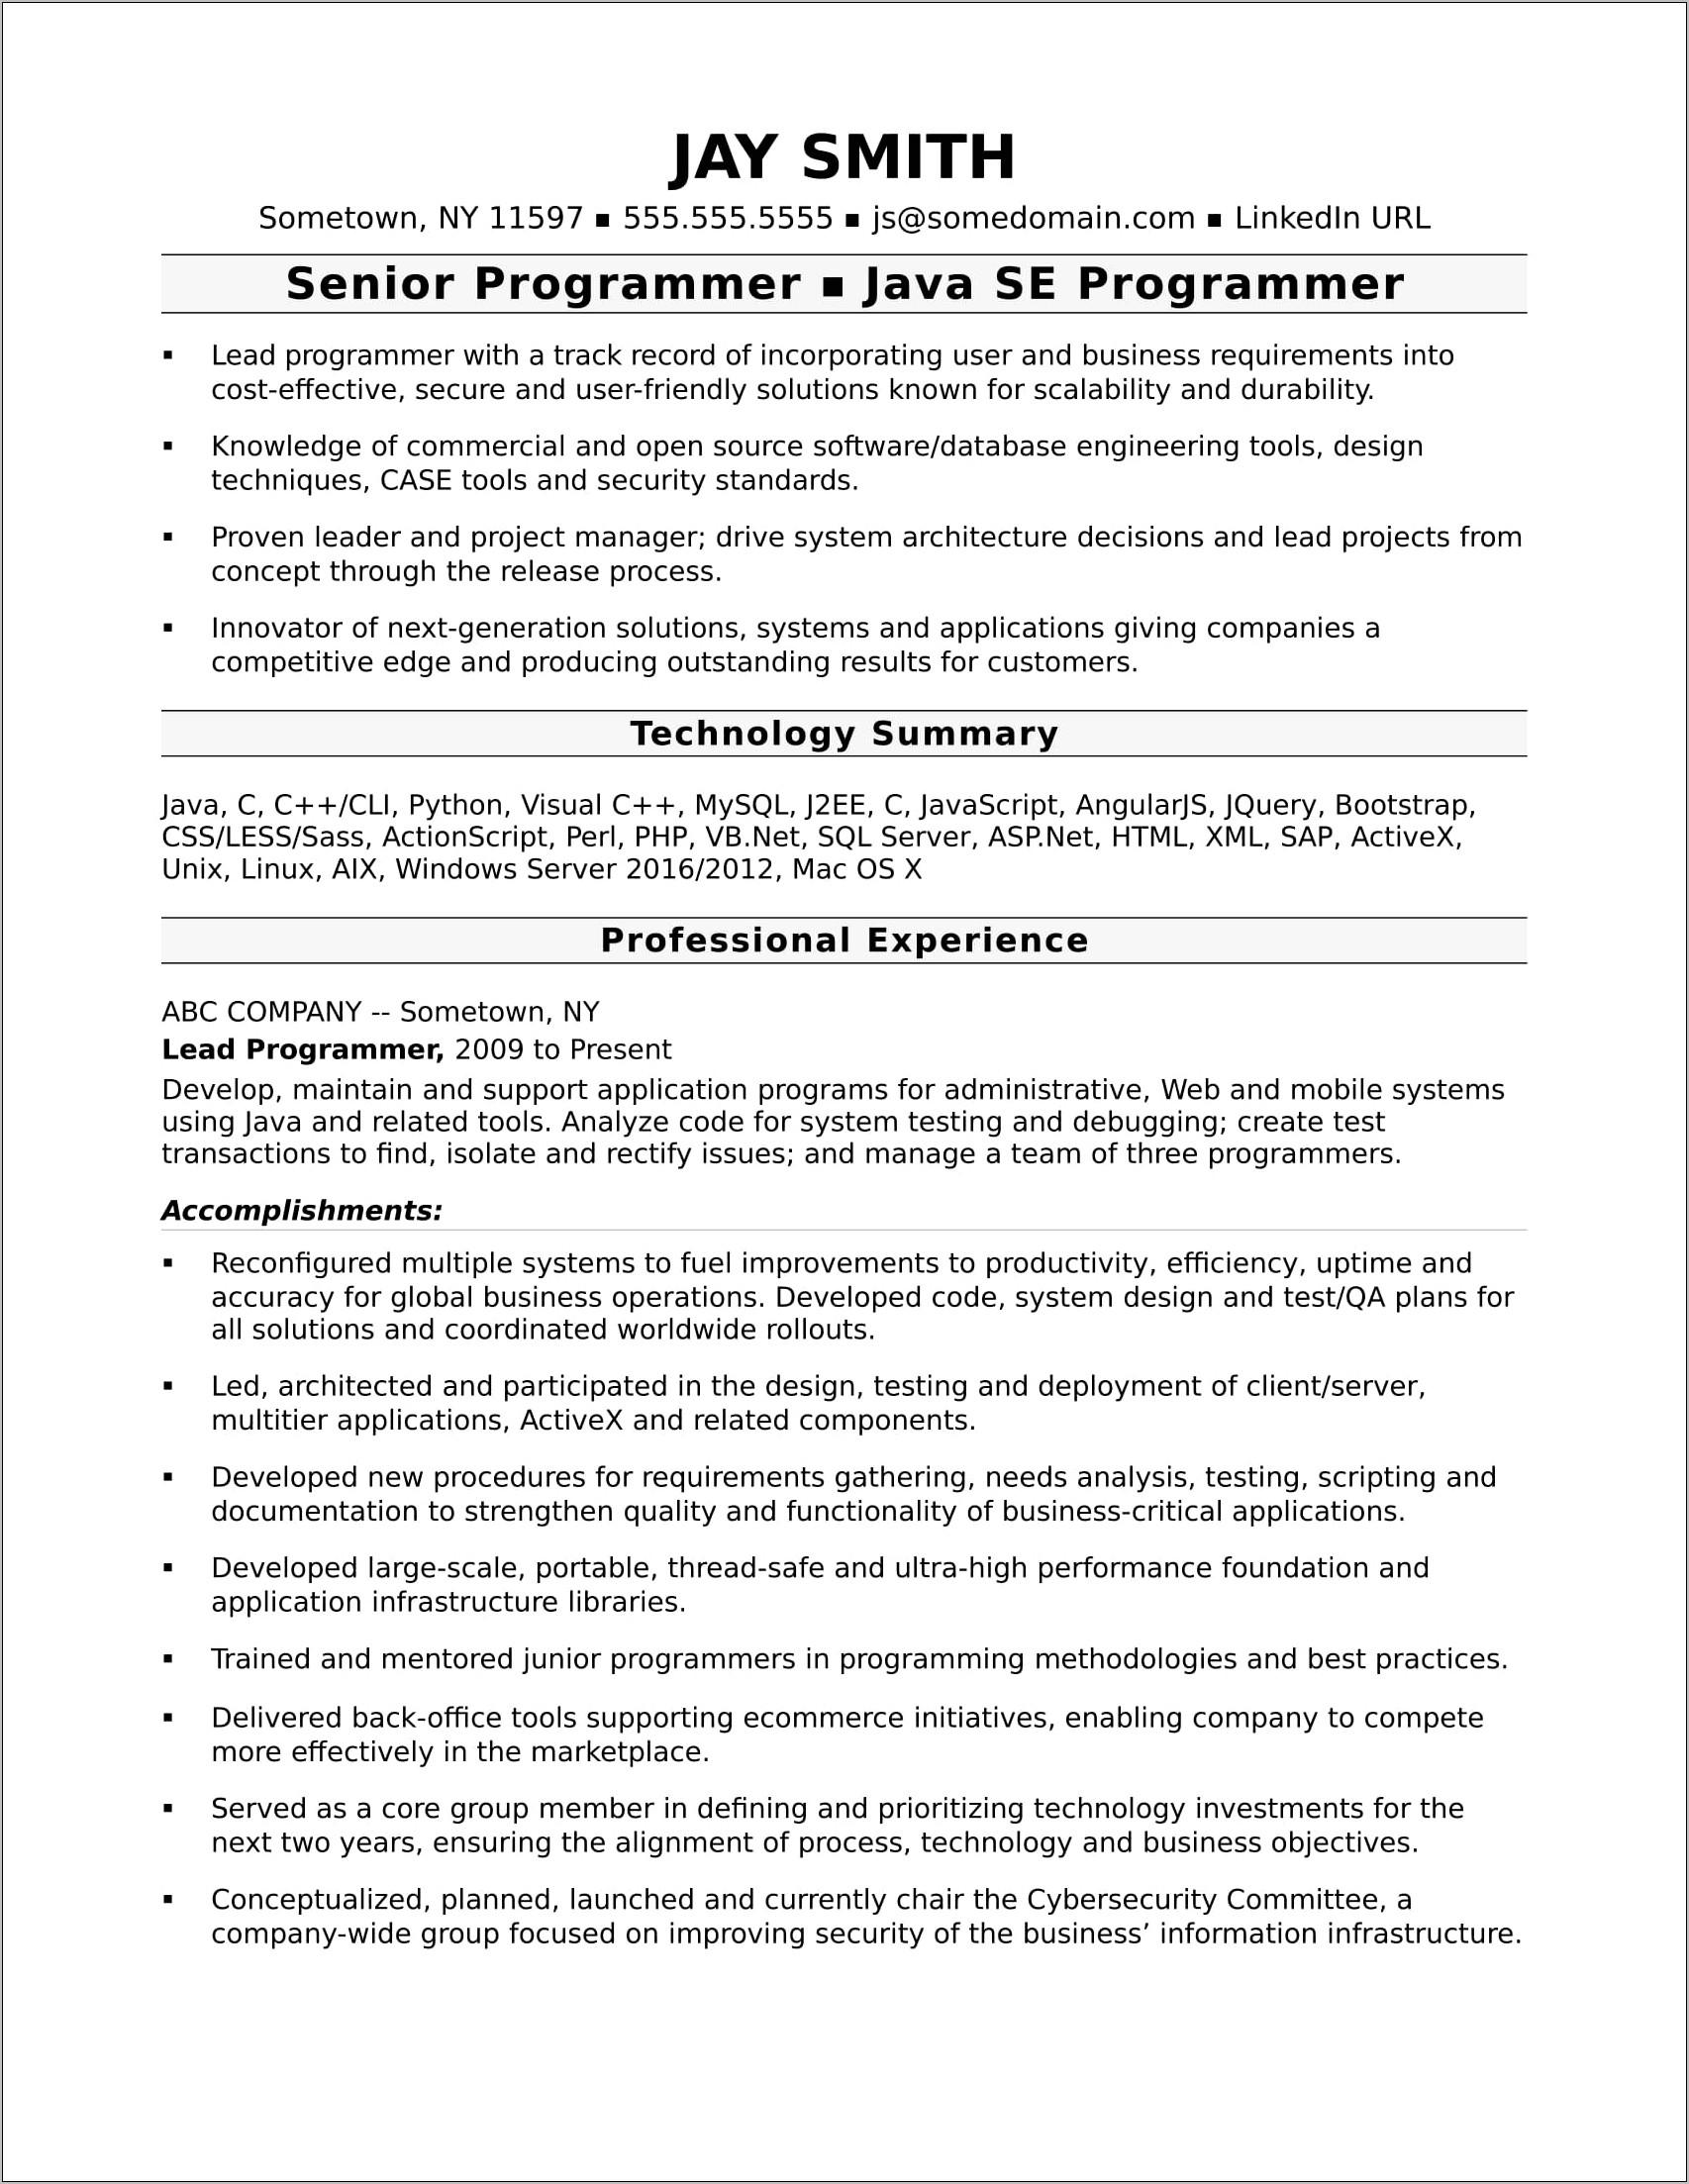 Resume Experience Writing For Present Job